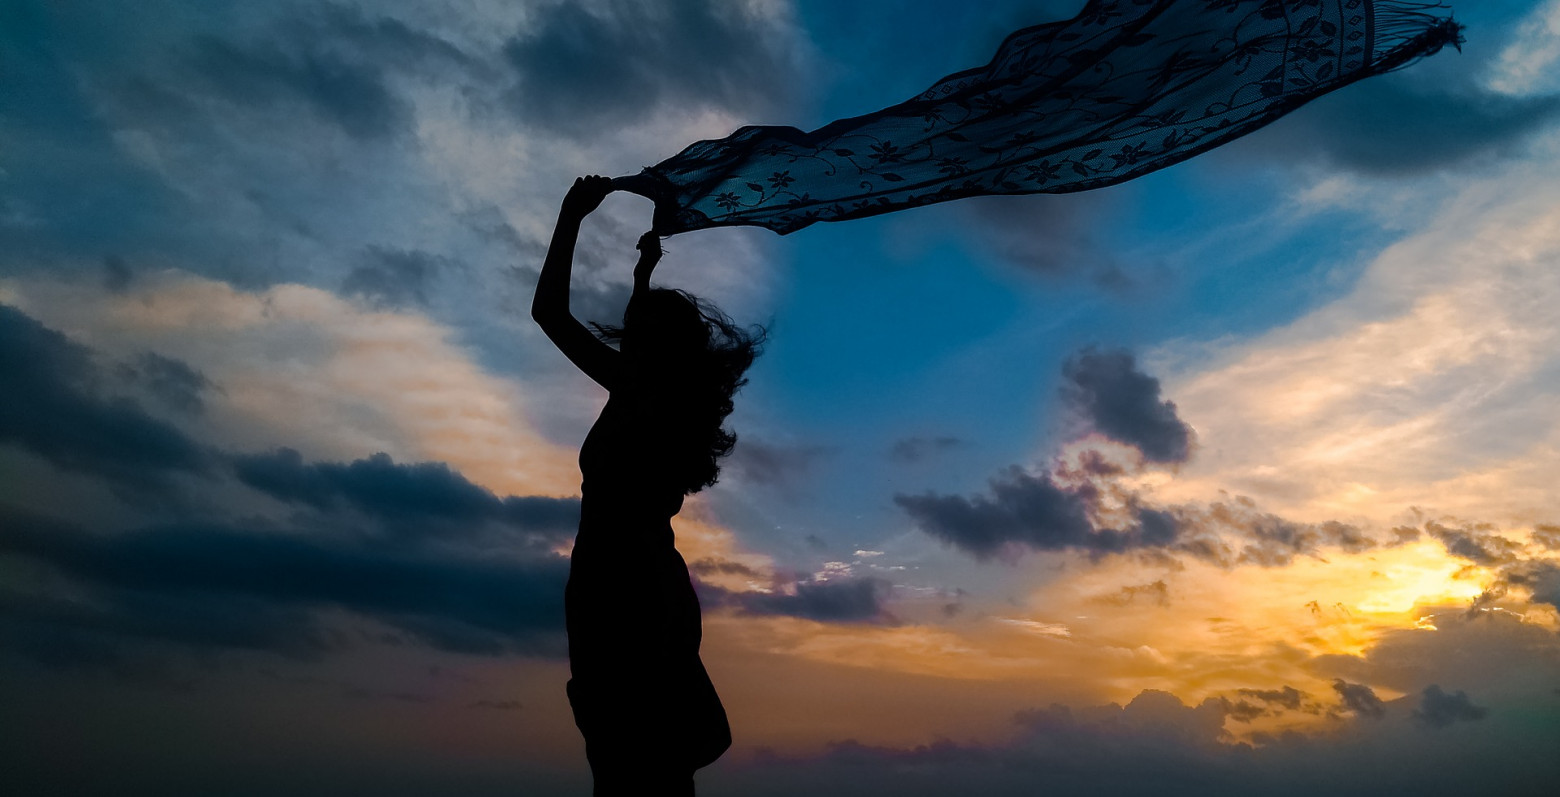 Silhouette of a woman waving a scarf in the sky against the backdrop of a cloudy sky at sunset.